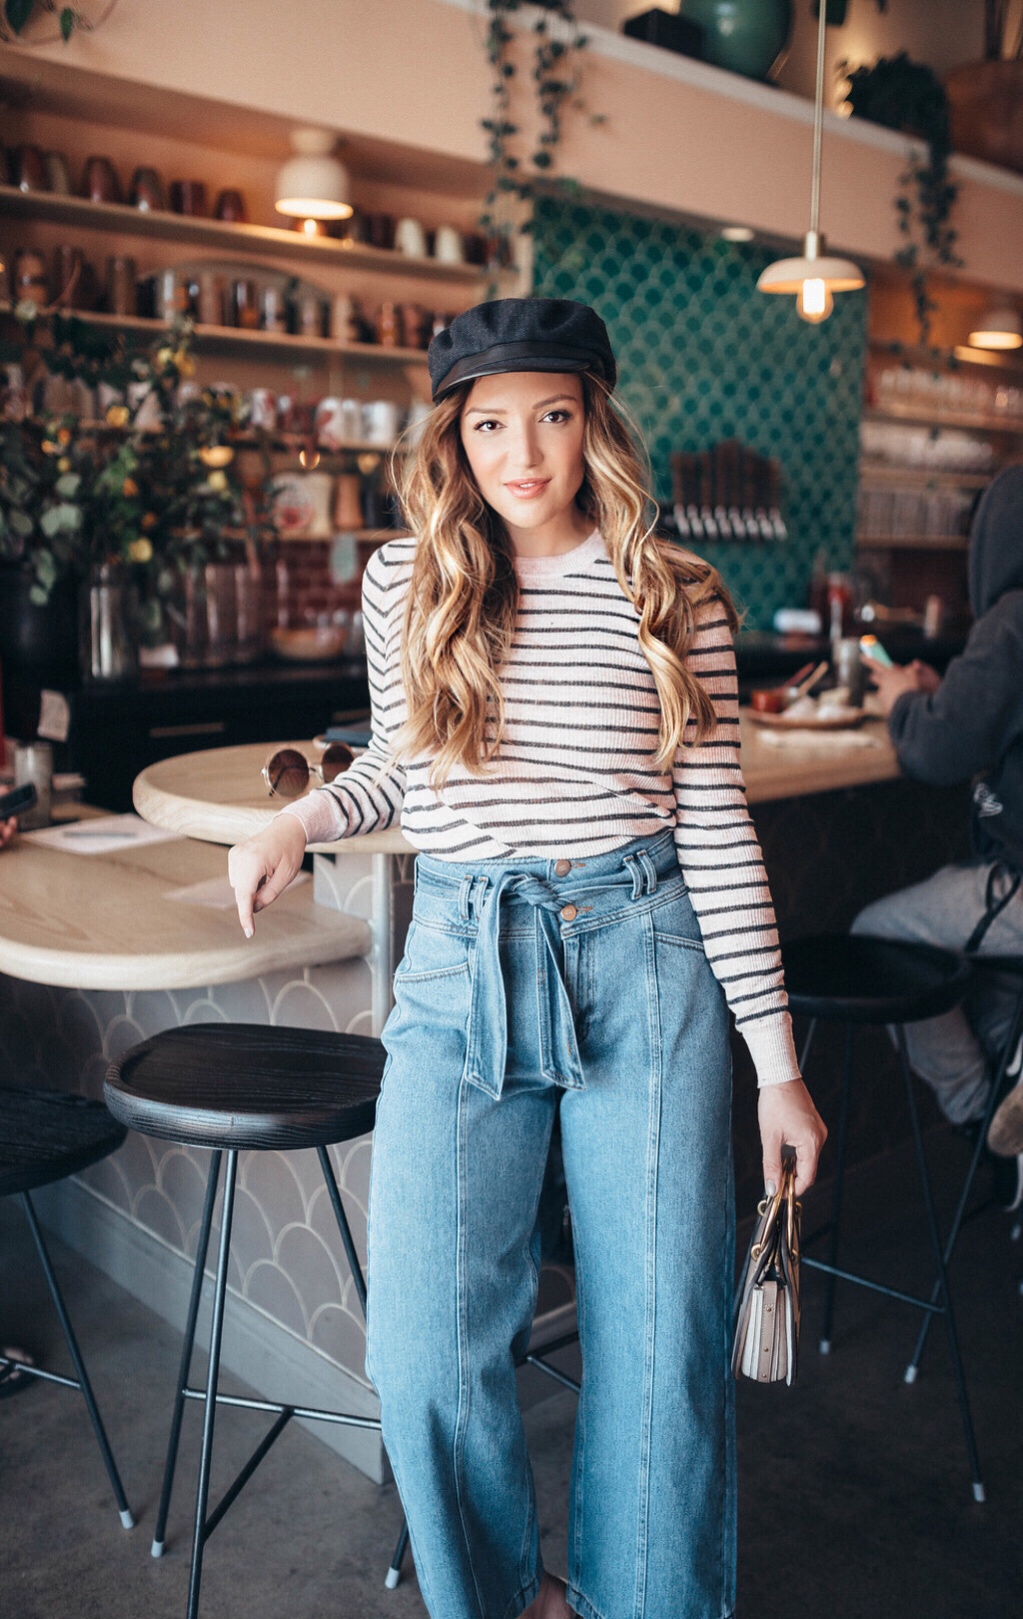 How to wear fall denim, styling tips featured by top US fashion blog, Just Add Glam